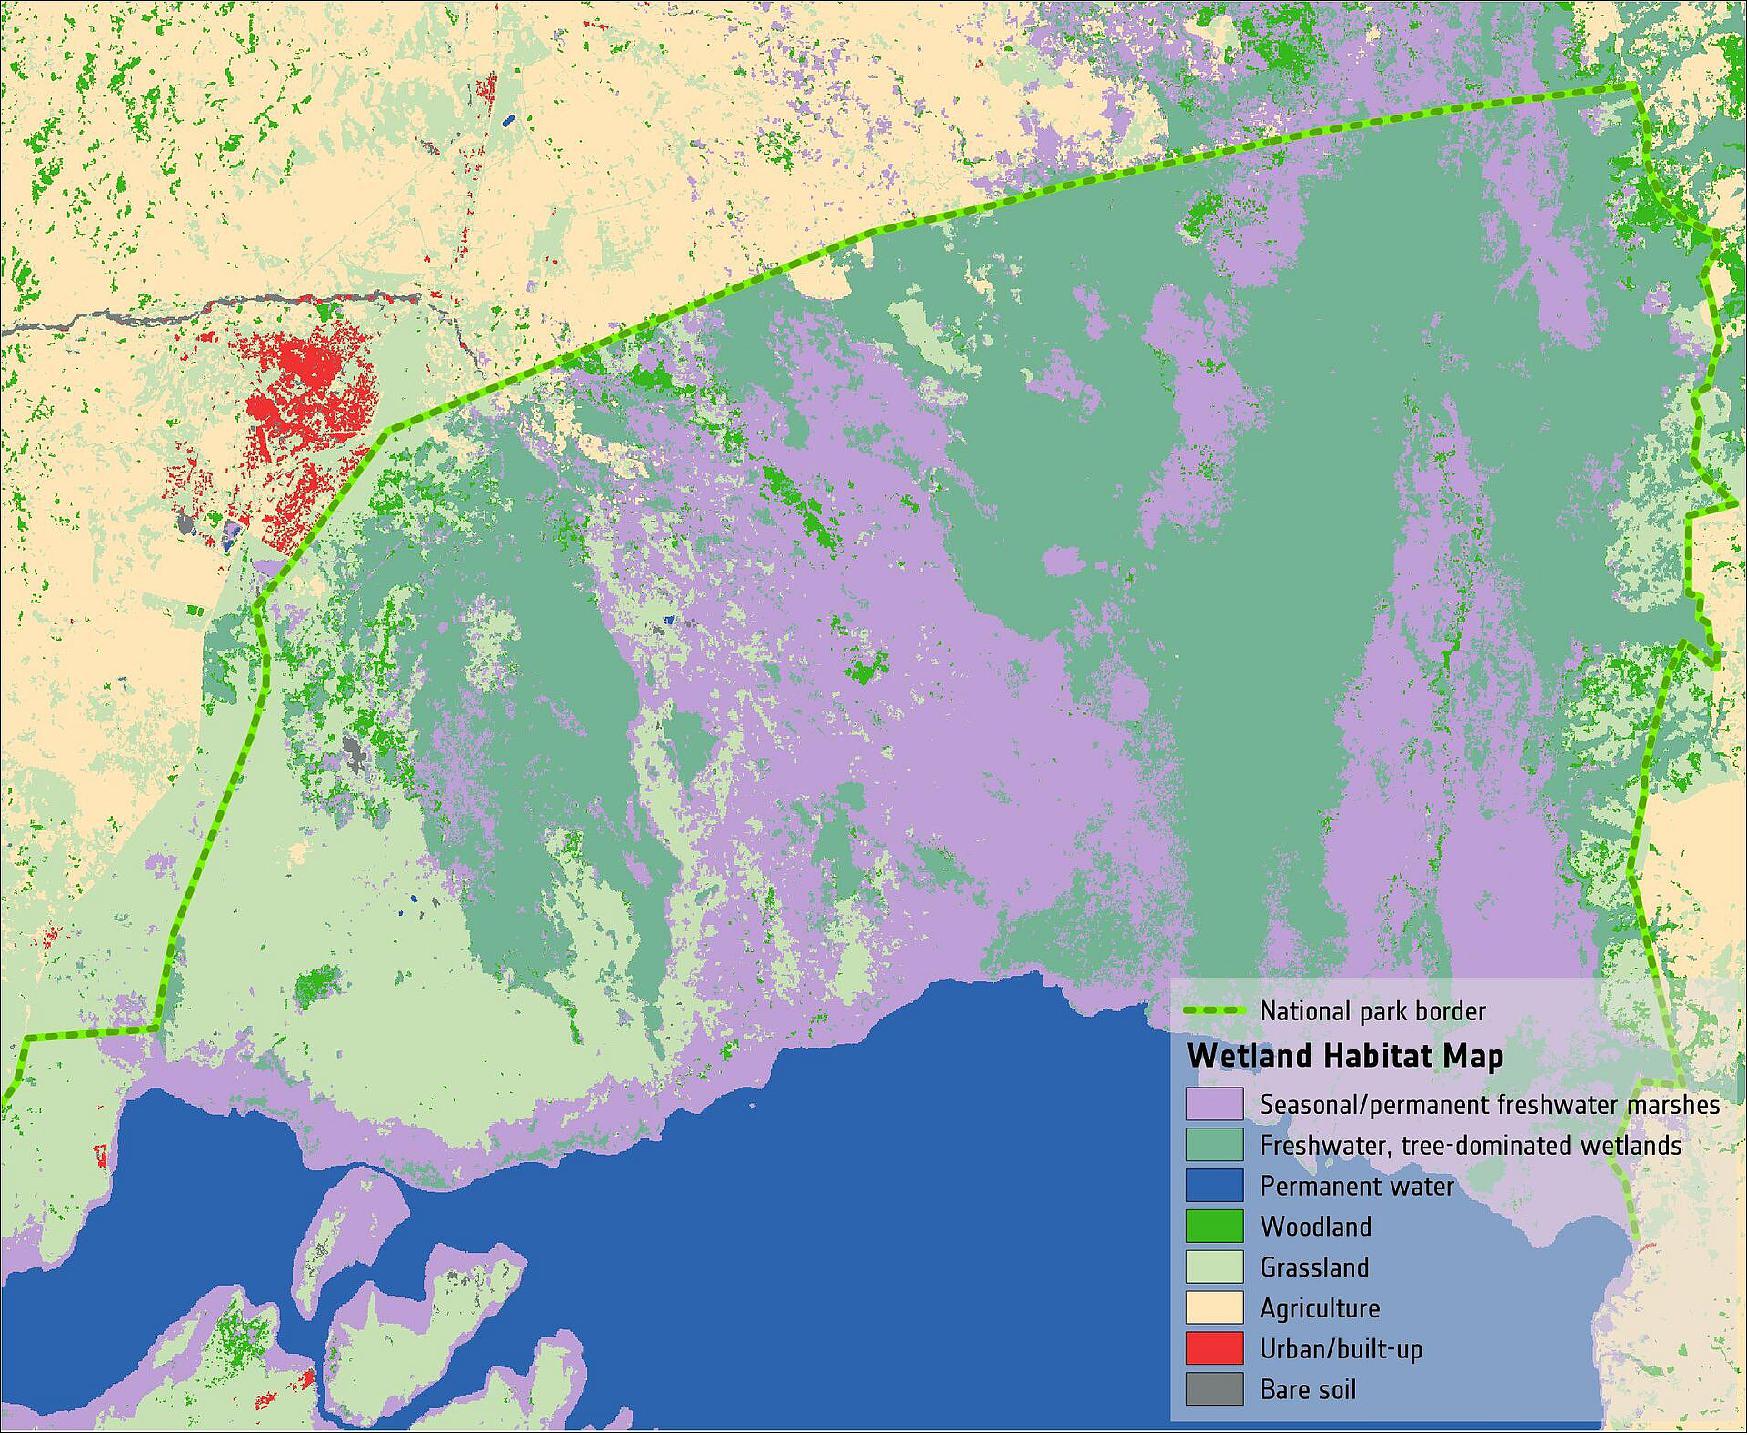 Figure 7: The wetland habitat map, generated by GlobWetland Africa, provides a detailed map of the Lake George wetlands and the surrounding area. Lake George was designated in 1988 as Uganda’s first Ramsar site, given its importance as a center for biological diversity. The city of Kasese can be seen in bright red. Signs of agricultural encroachment into the Ramsar site can be seen along the northern boundary (image credit: ESA, the image contains modified Copernicus Sentinel data (2019), processed by ESA GlobWetland Africa, ITC/DHI GRAS)